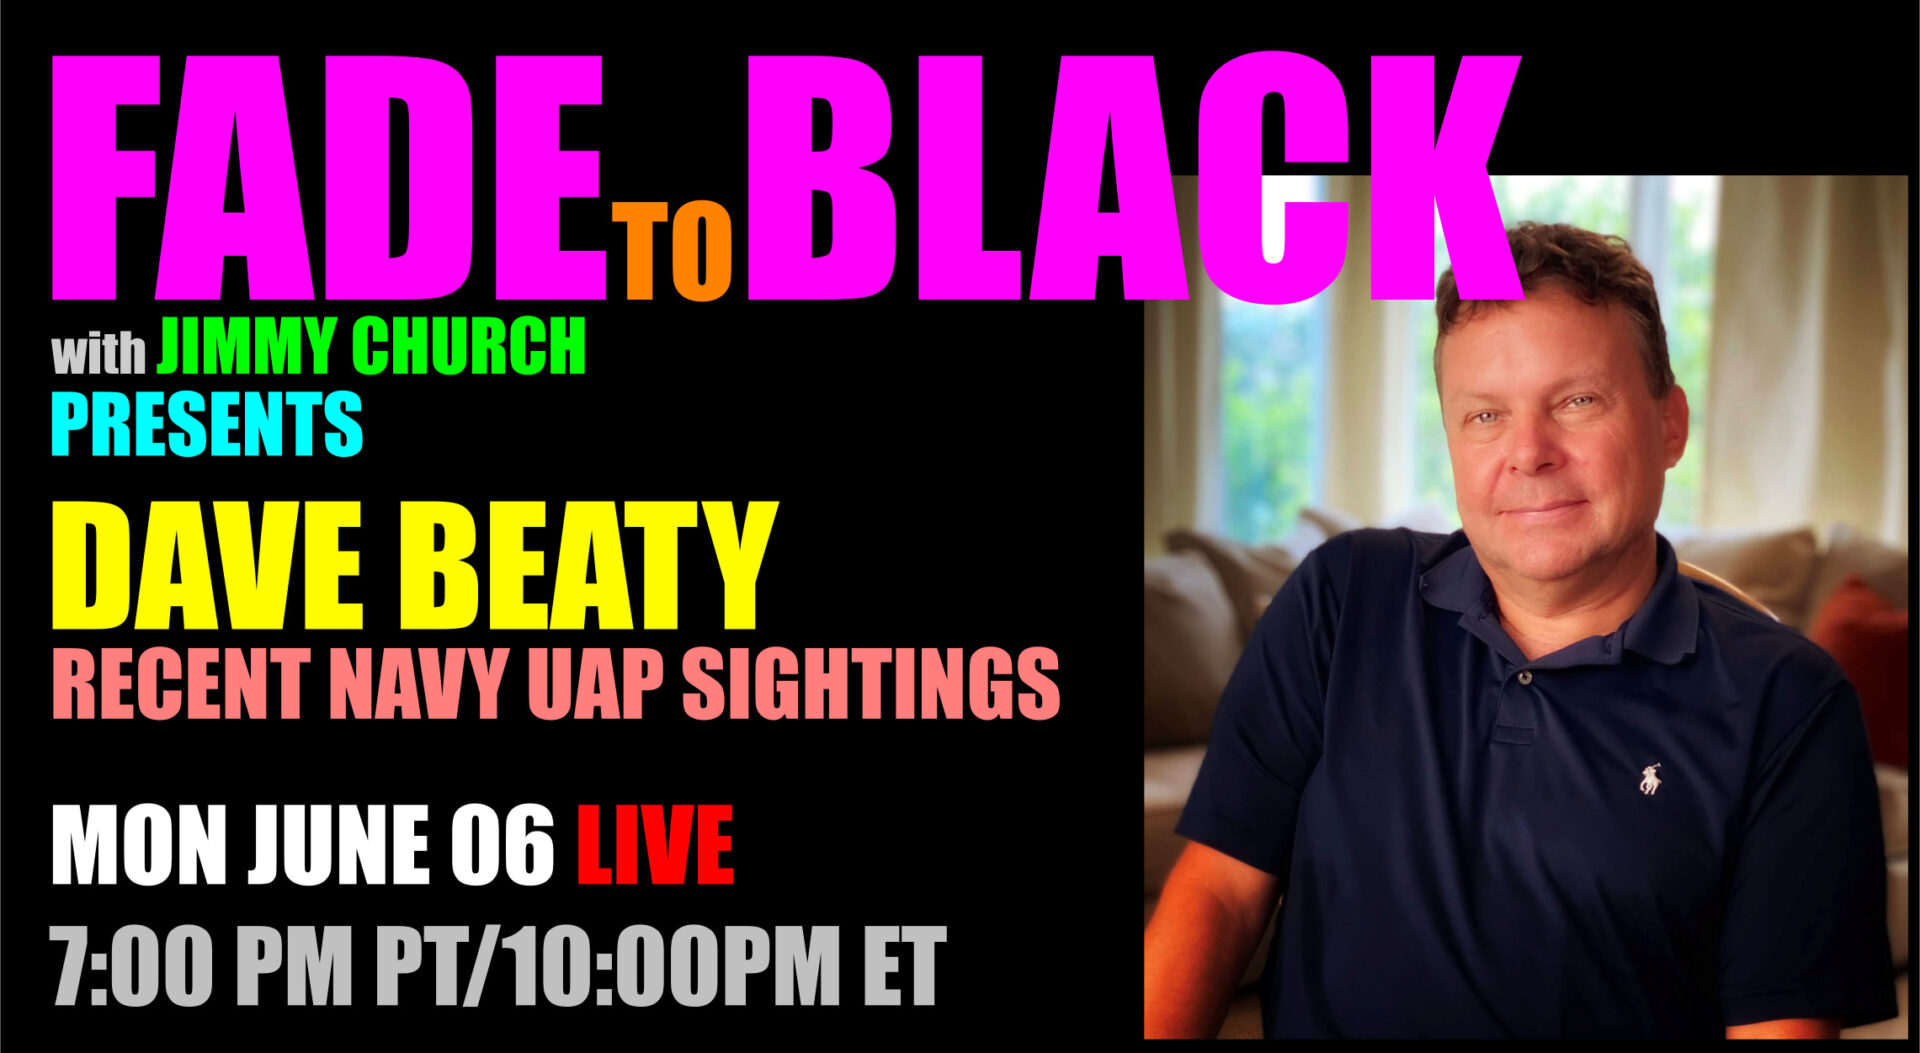 Fade To Black - Dave Beaty - June 6th